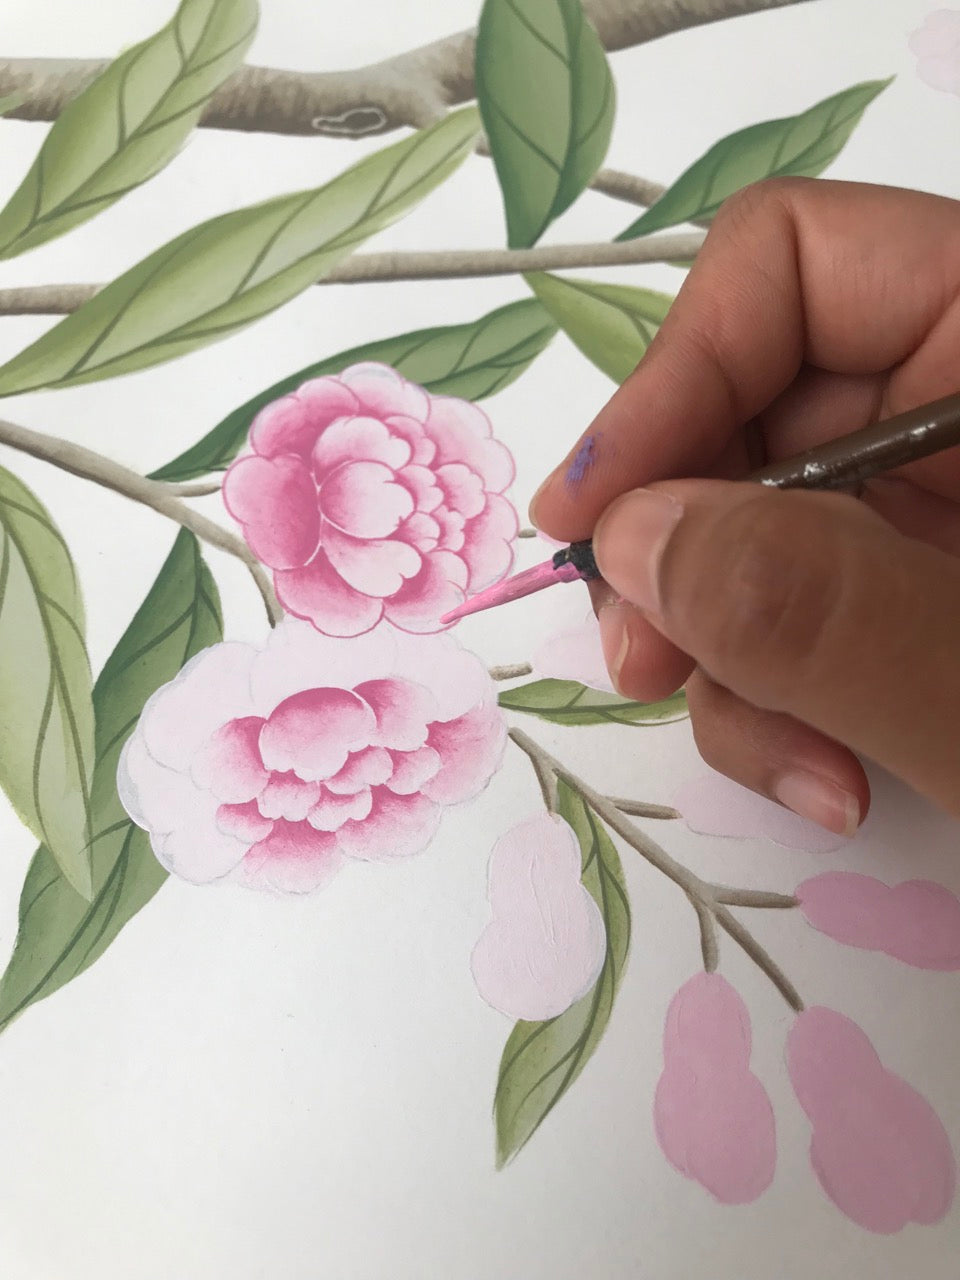 Up close photo of a flower being painted by Diane Hill's using chinoiserie painting techniques